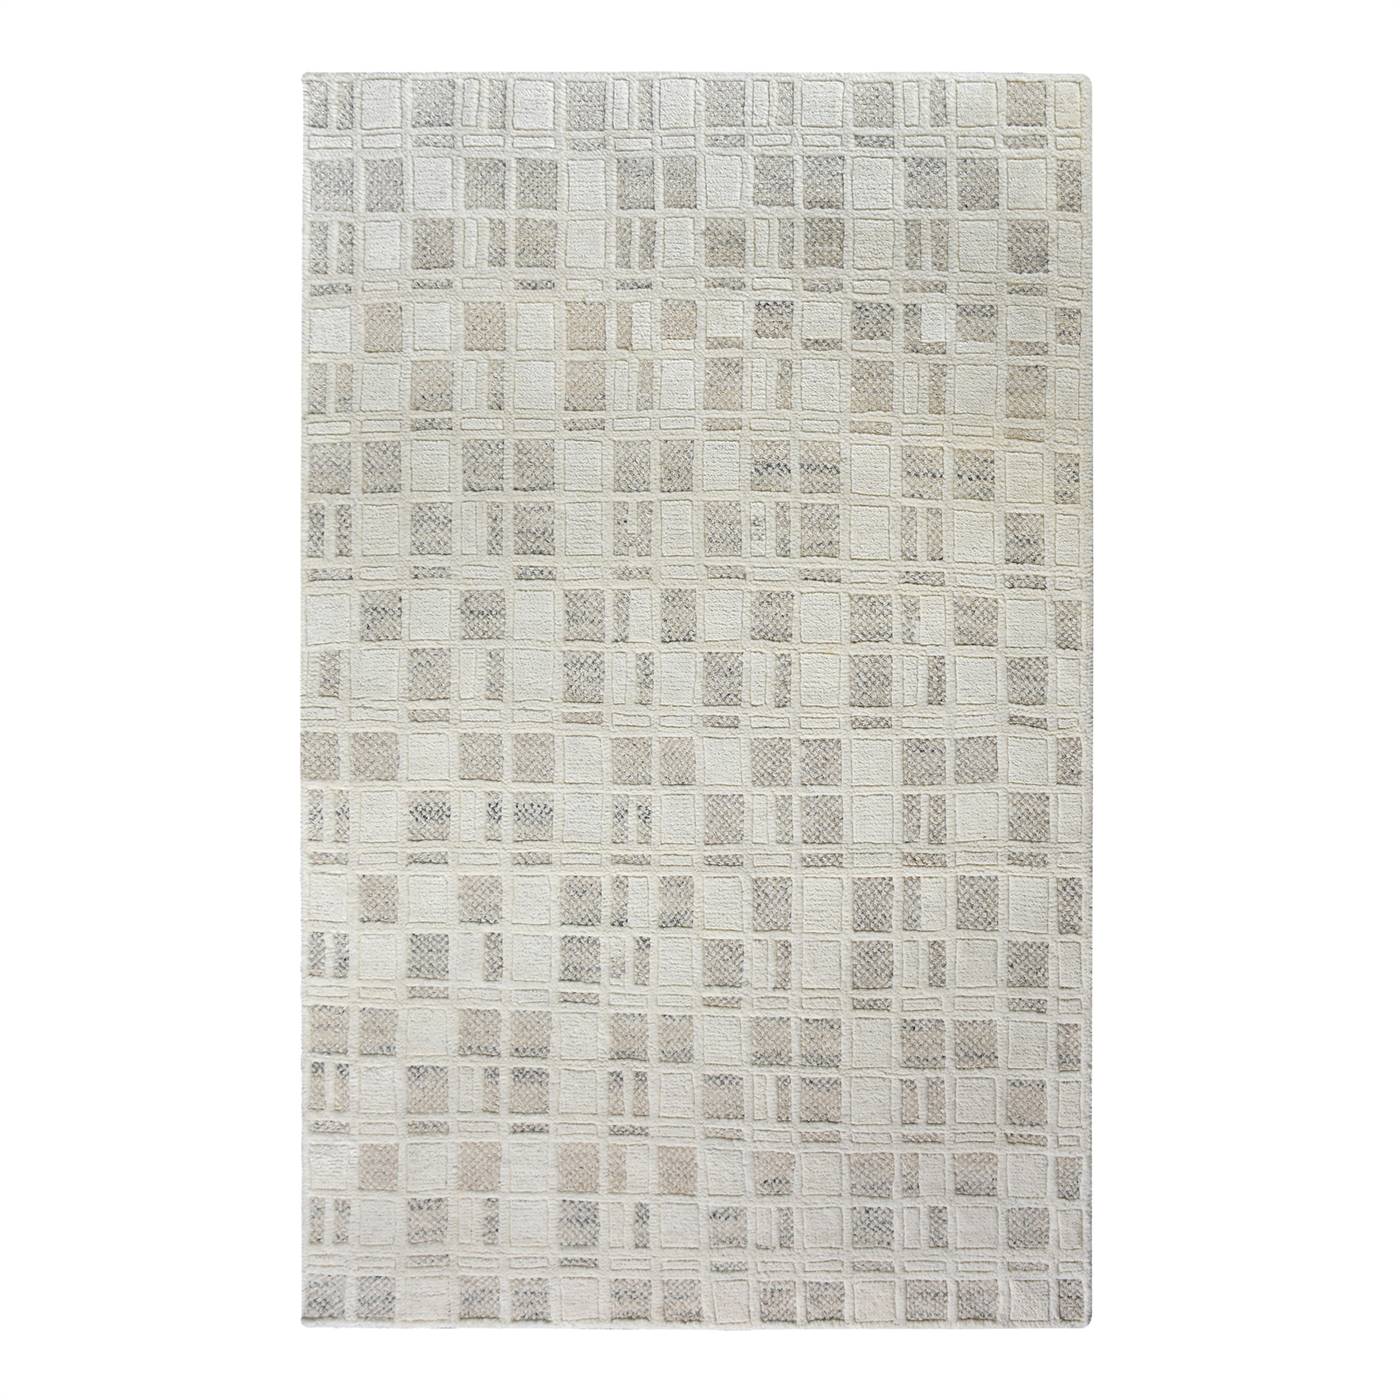 Area Rug, Bedroom Rug, Living Room Rug, Living Area Rug, Indian Rug, Office Carpet, Office Rug, Shop Rug Online, Natural White, Beige , Nz Wool , Hand Knotted , Handknotted, All Cut, Intricate 